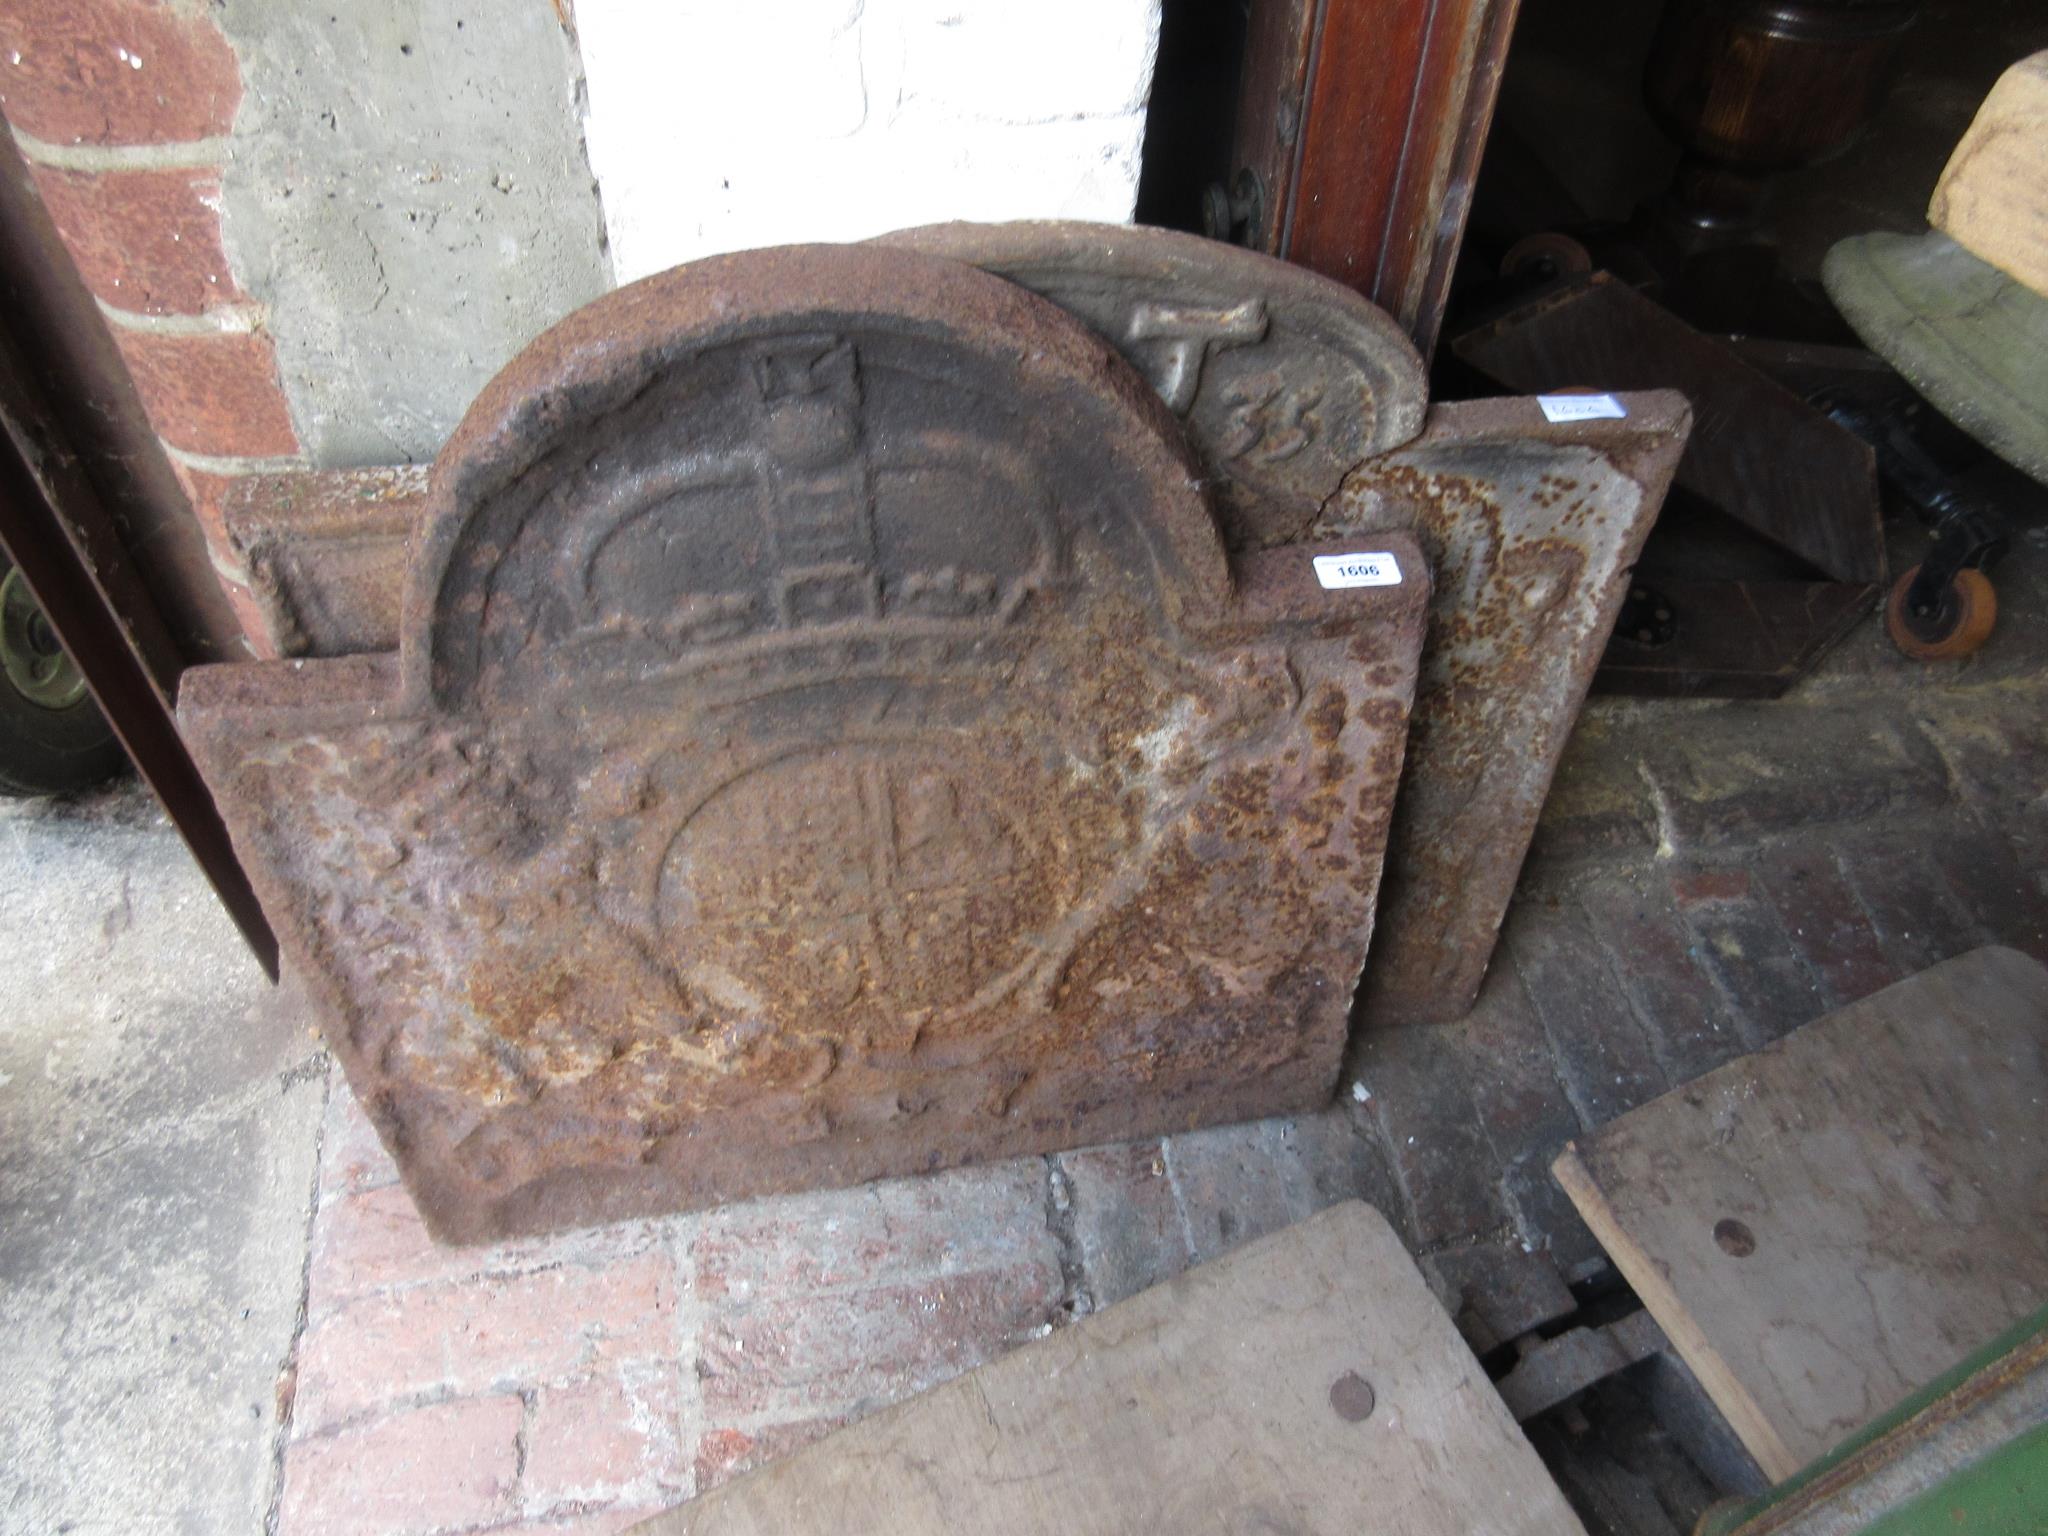 Two antique cast iron fire backs bearing coats of arms (one cracked)